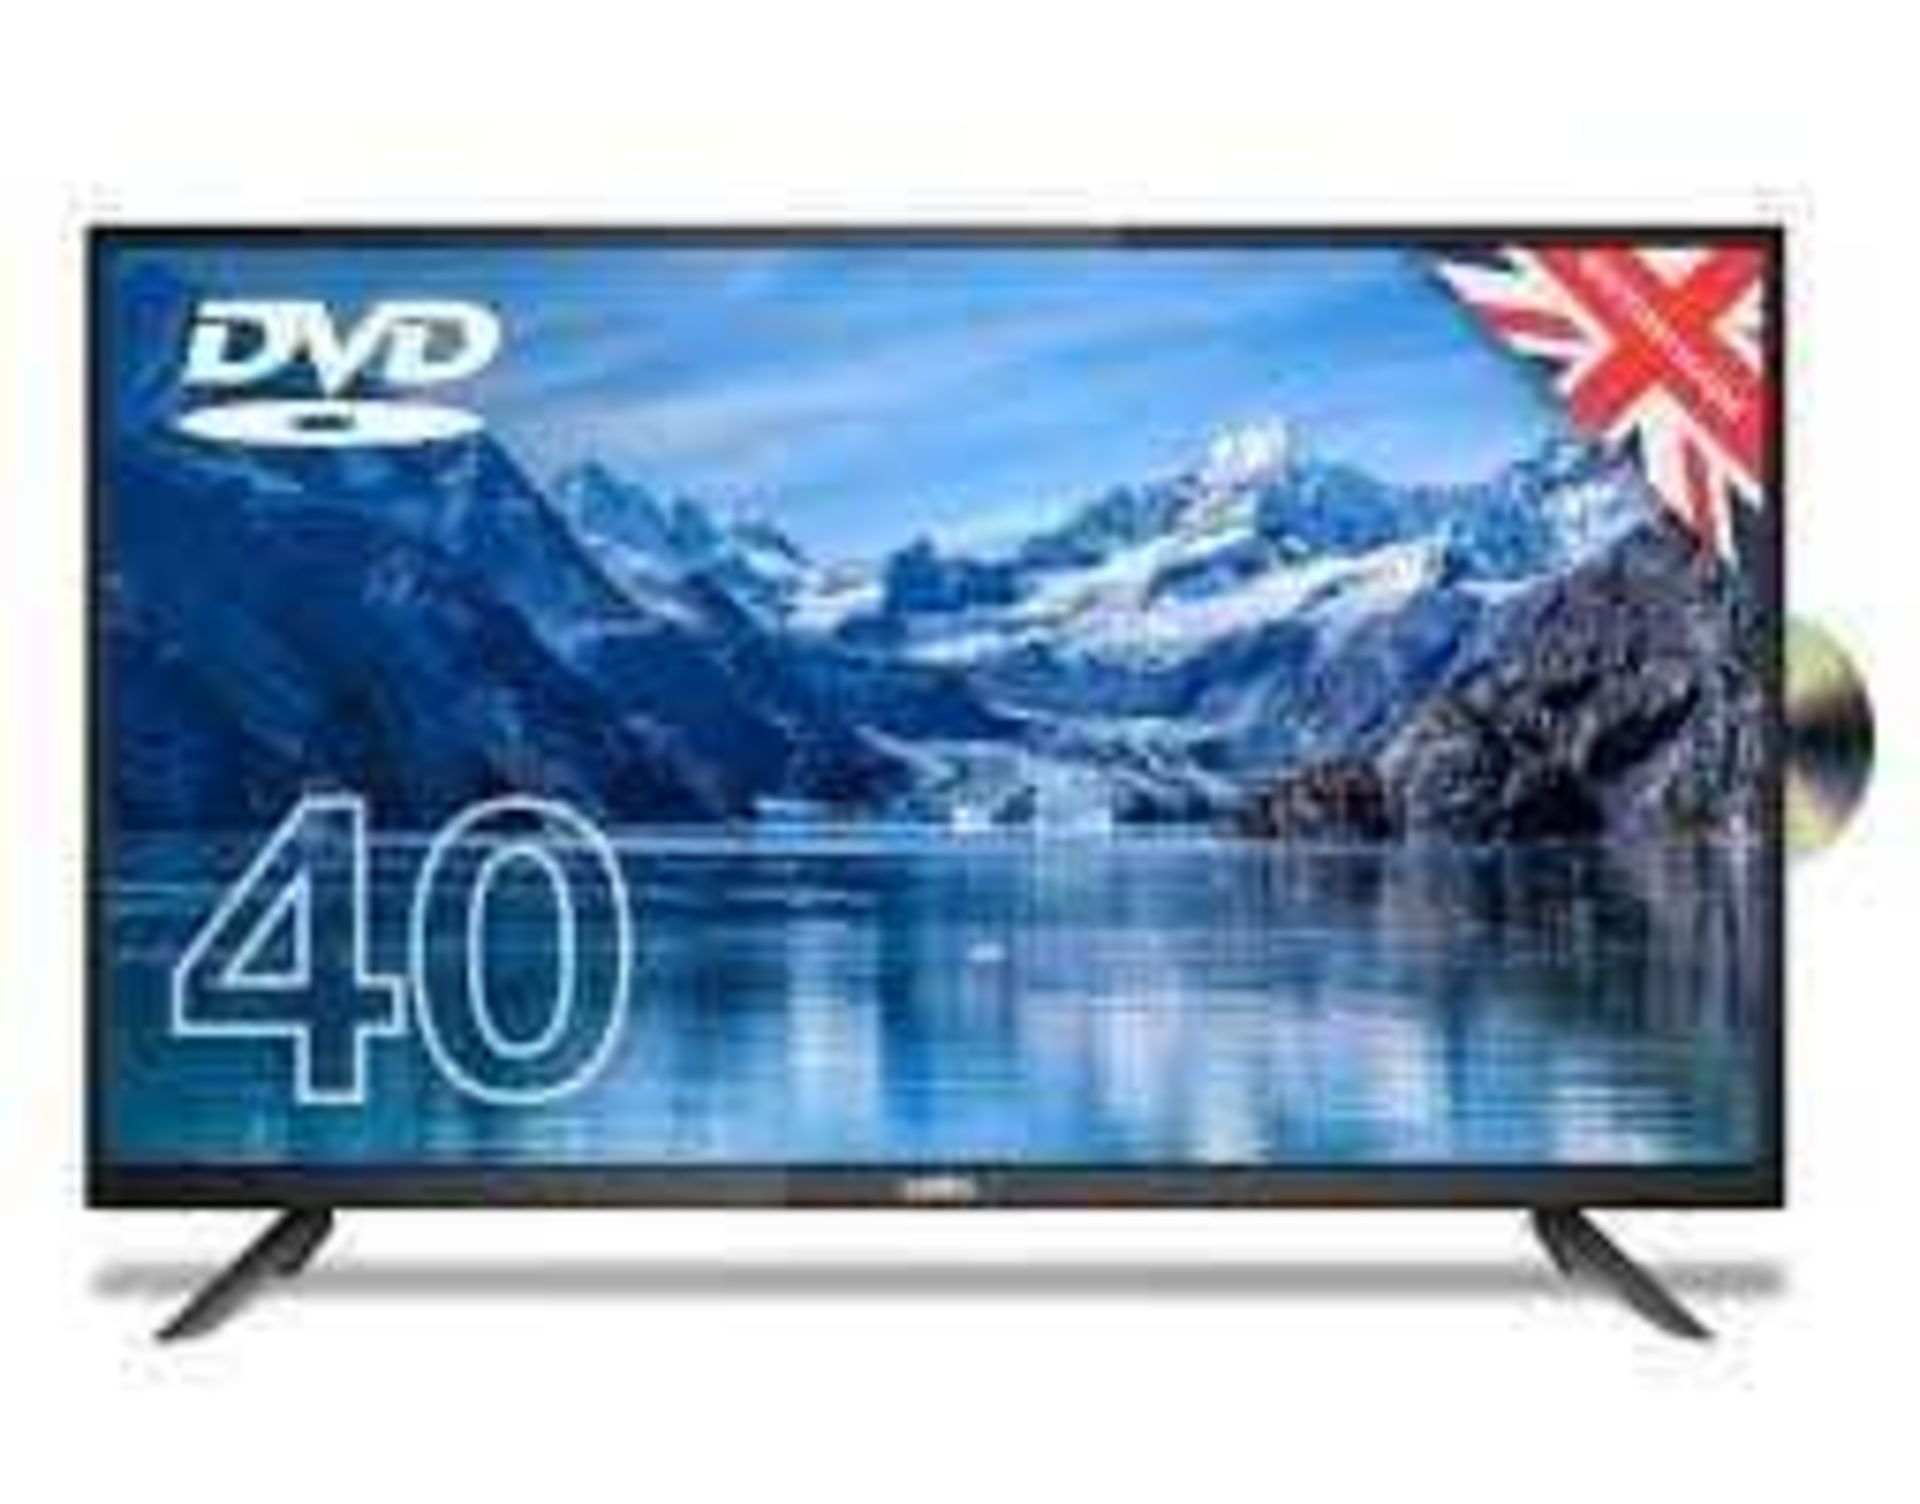 RRP £200 Boxed Cello 40" Full Hd Led Tv With Built-In DVD Player And Freeview T2 Hd